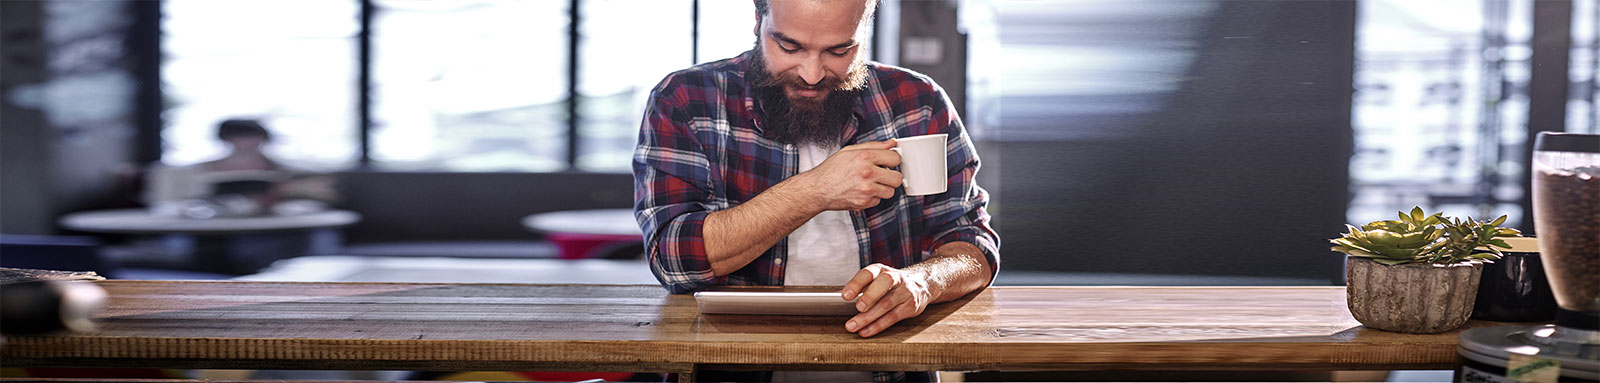 A man looking at a tablet while drinking a cup of coffee